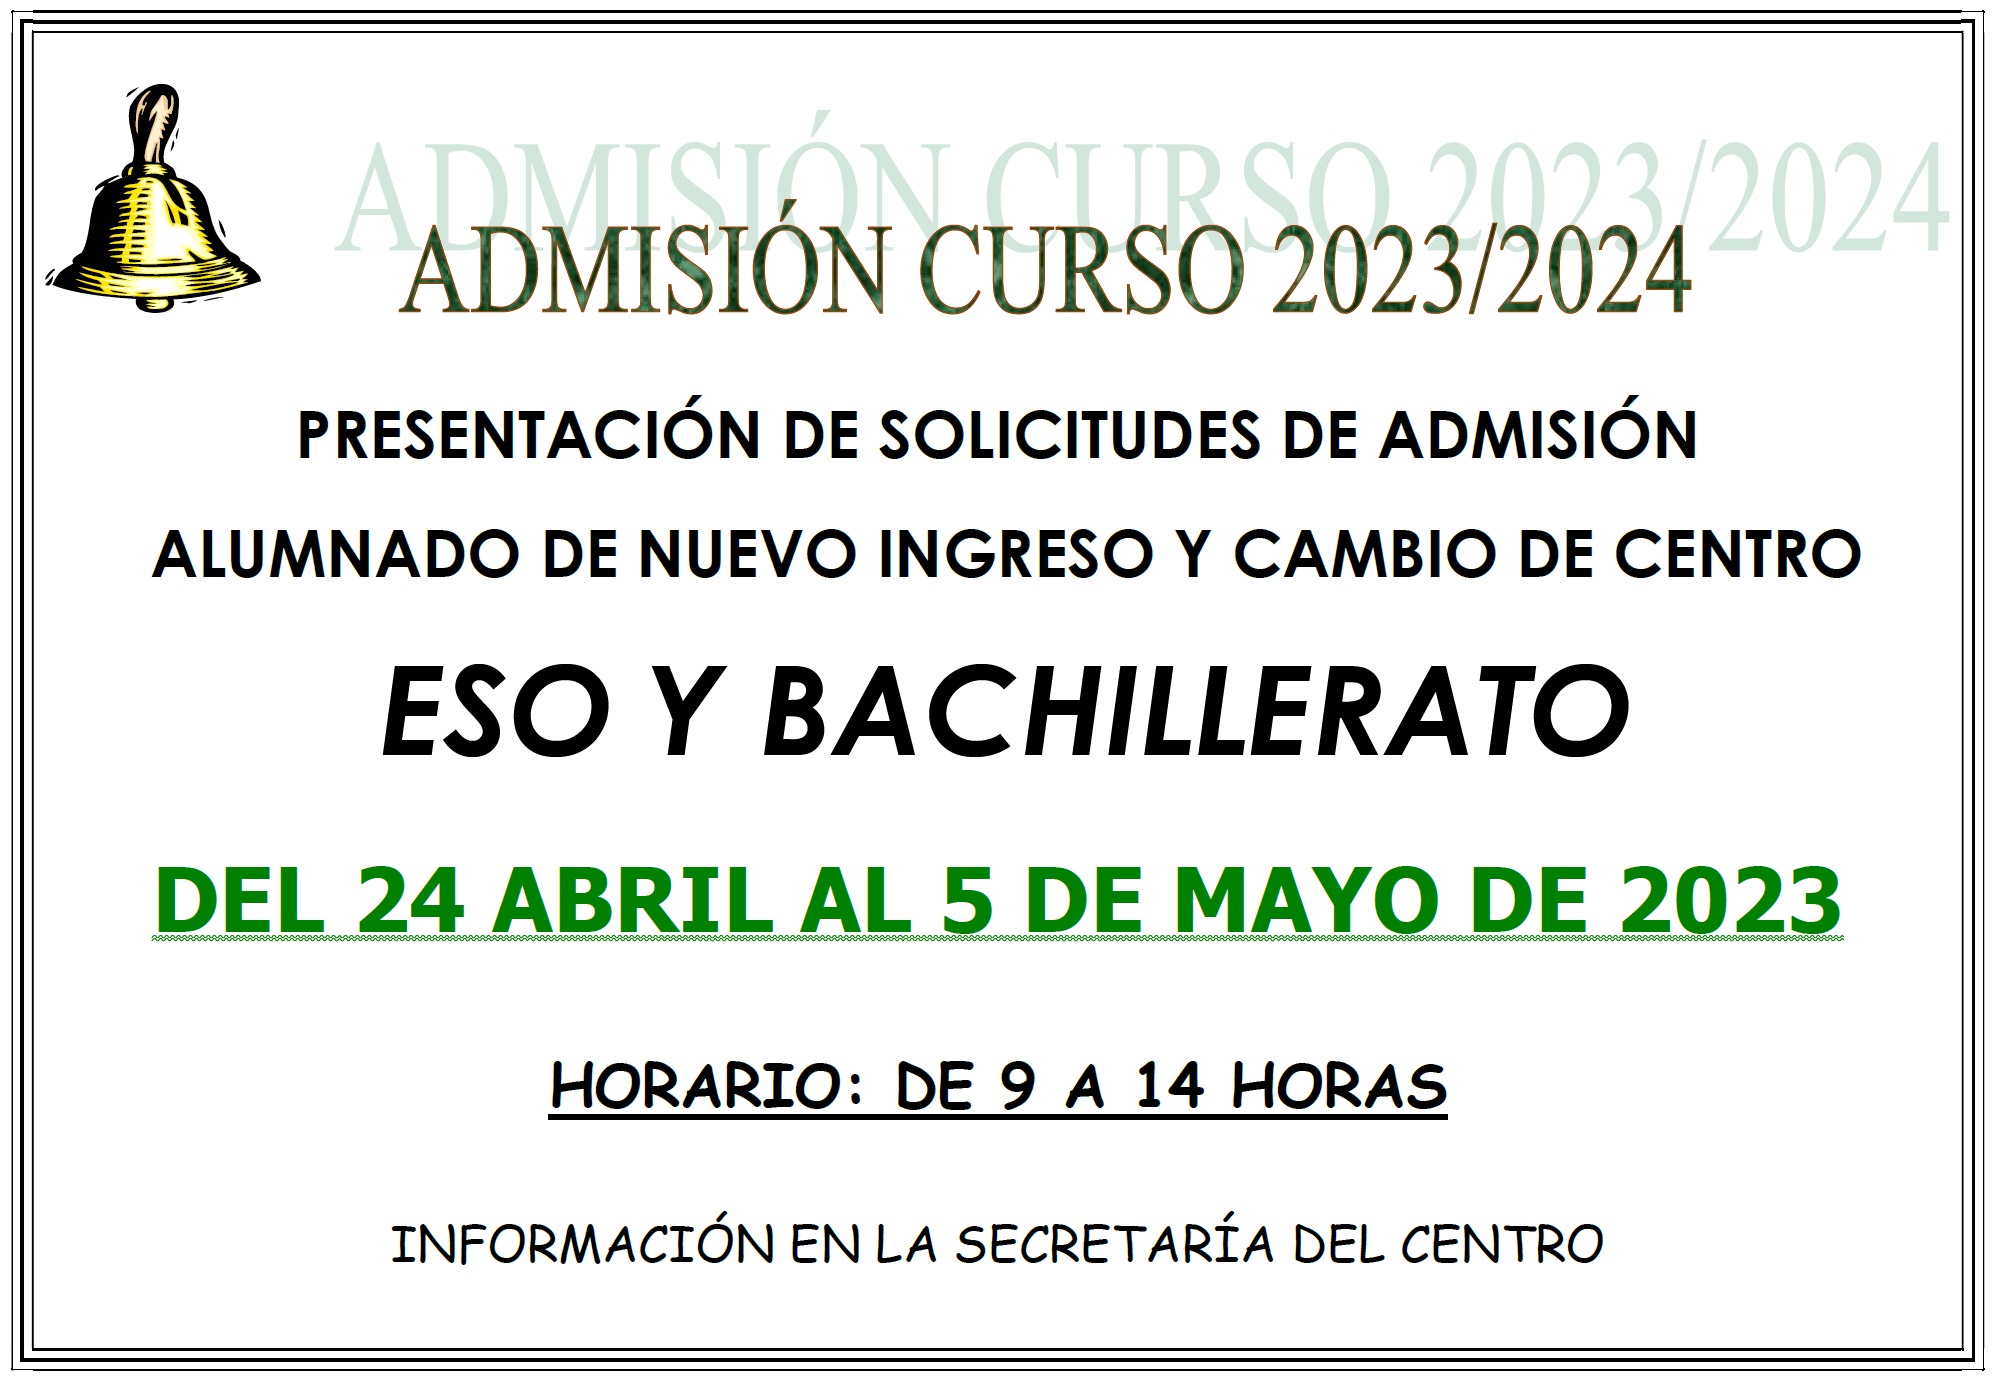 CARTELADMISIONESOYBACH 2023 2024